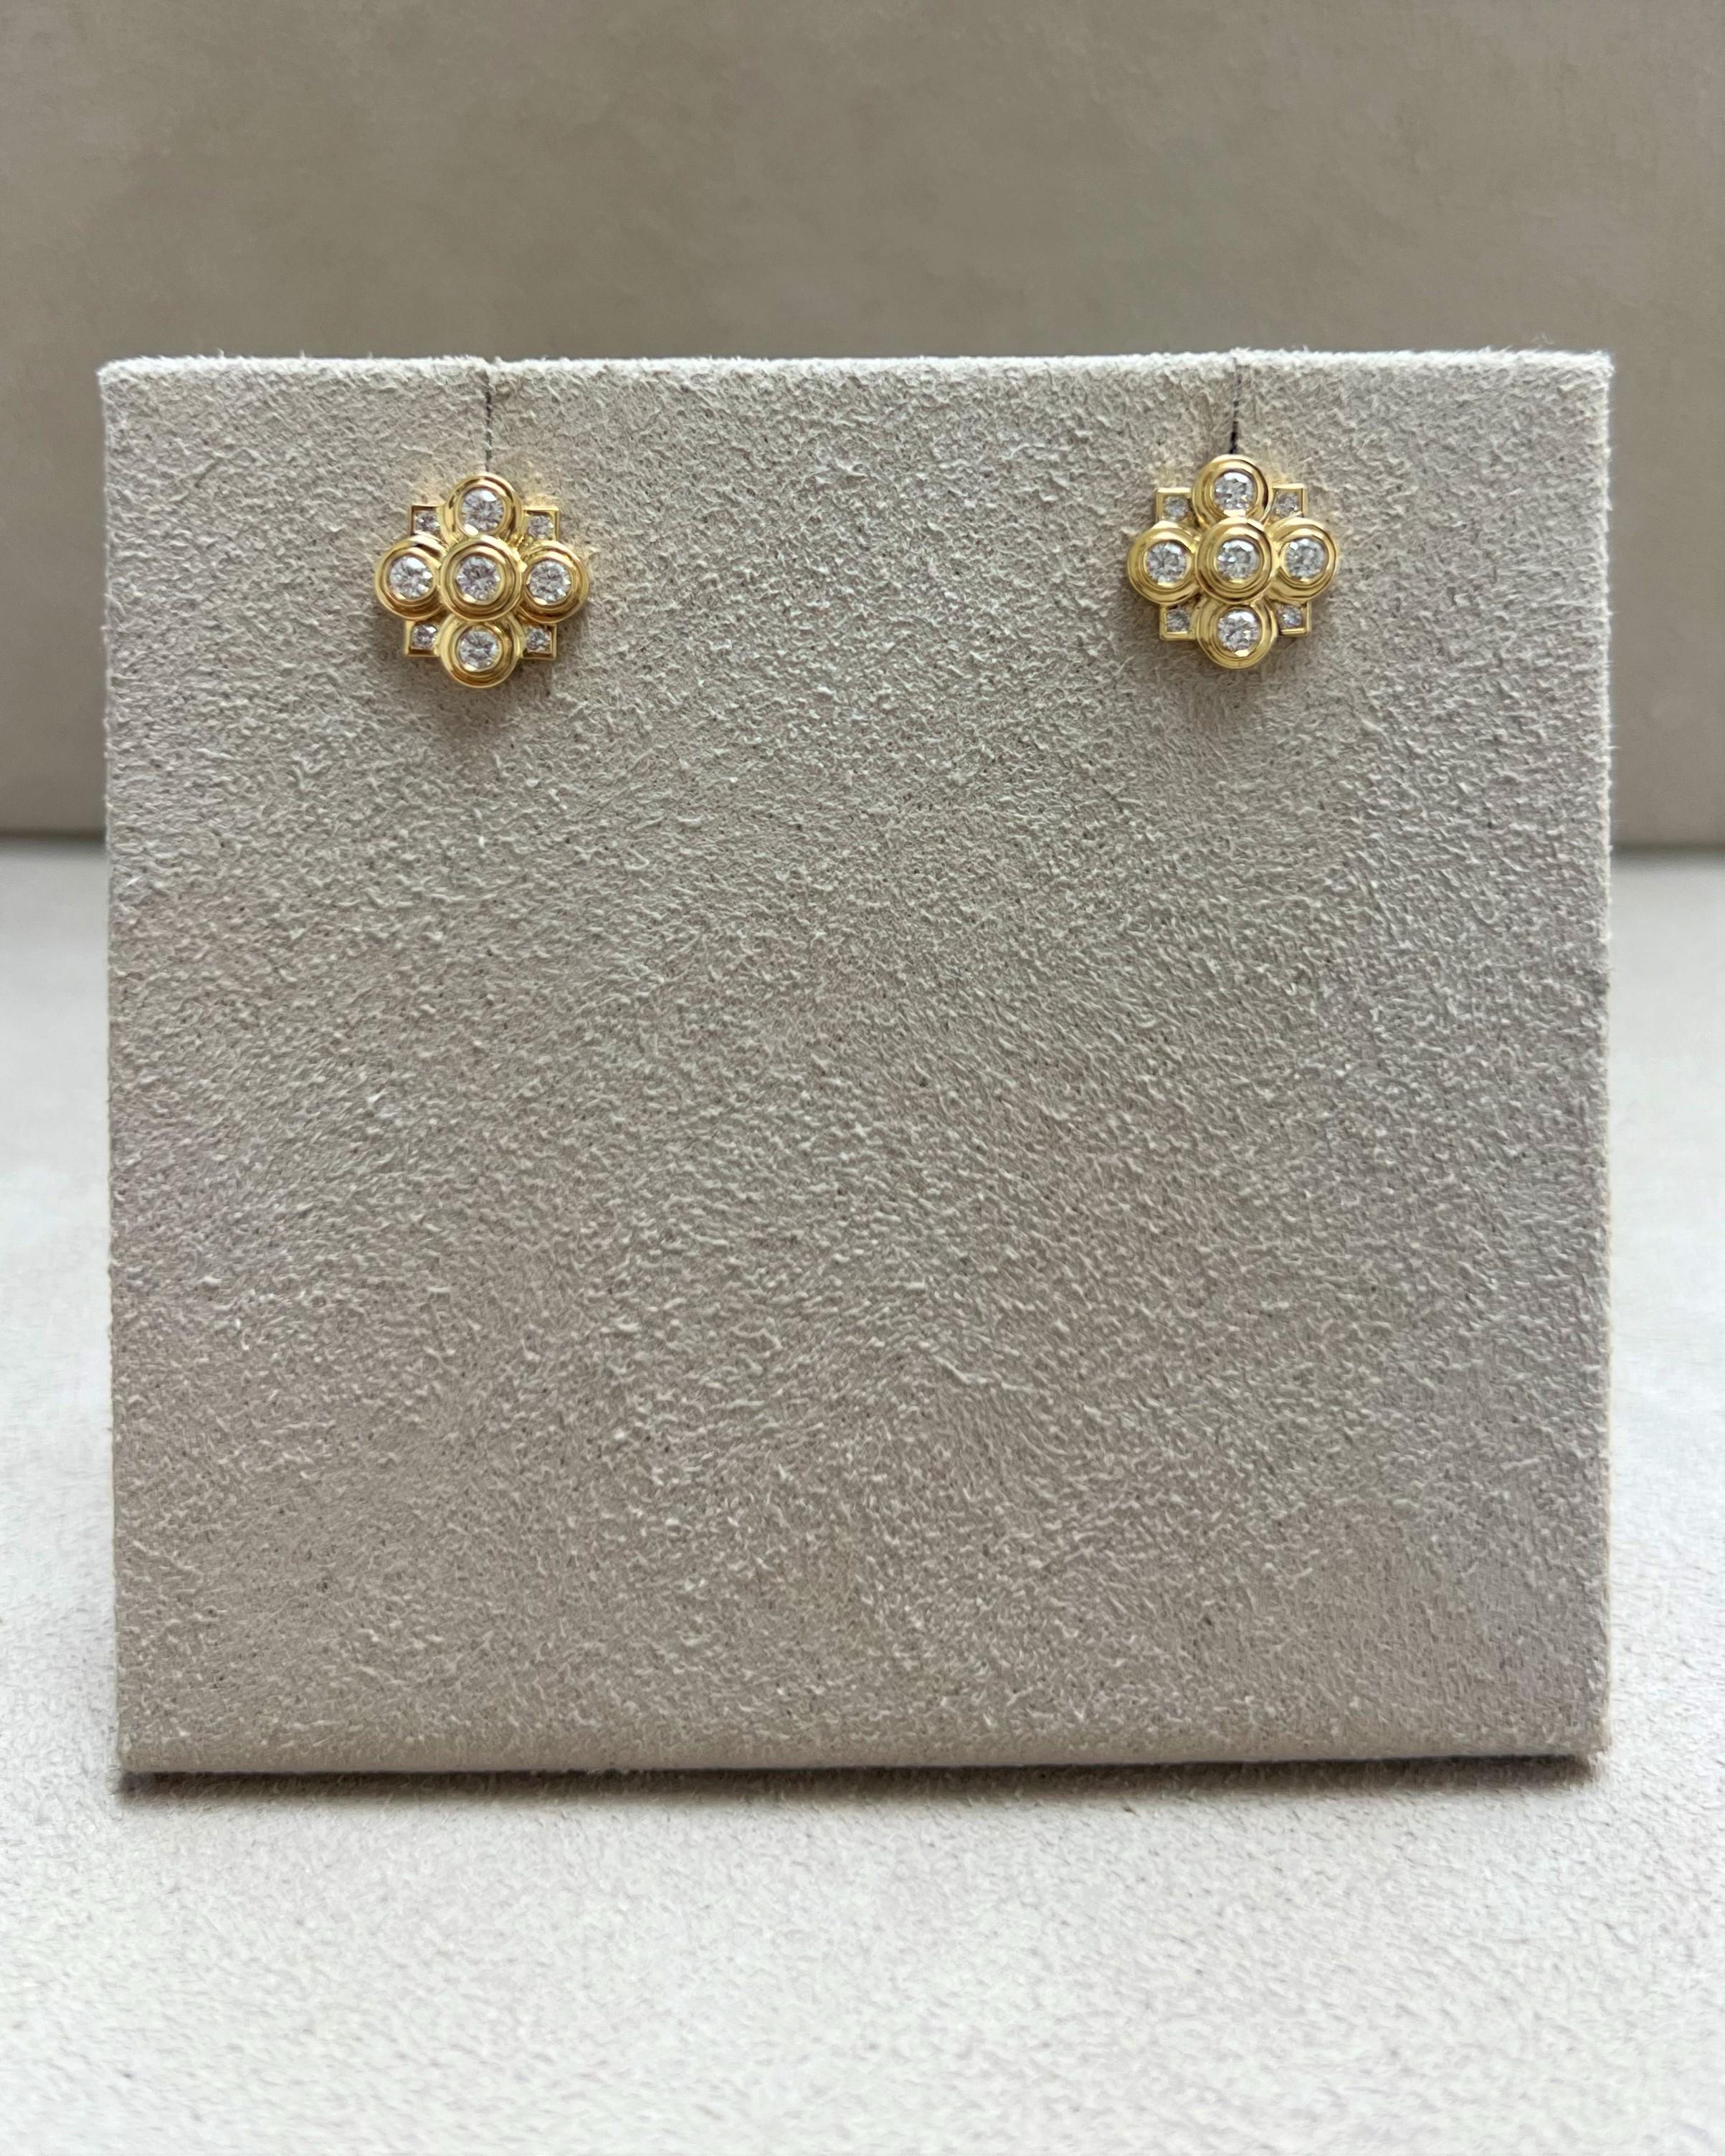 Created in 18 karat yellow gold
Diamonds 0.30 carat approx.
18kyg butterfly backs
Post backs for pierced ears



About the Designers ~ Dharmesh & Namrata

Drawing inspiration from little things, Dharmesh & Namrata Kothari have created an